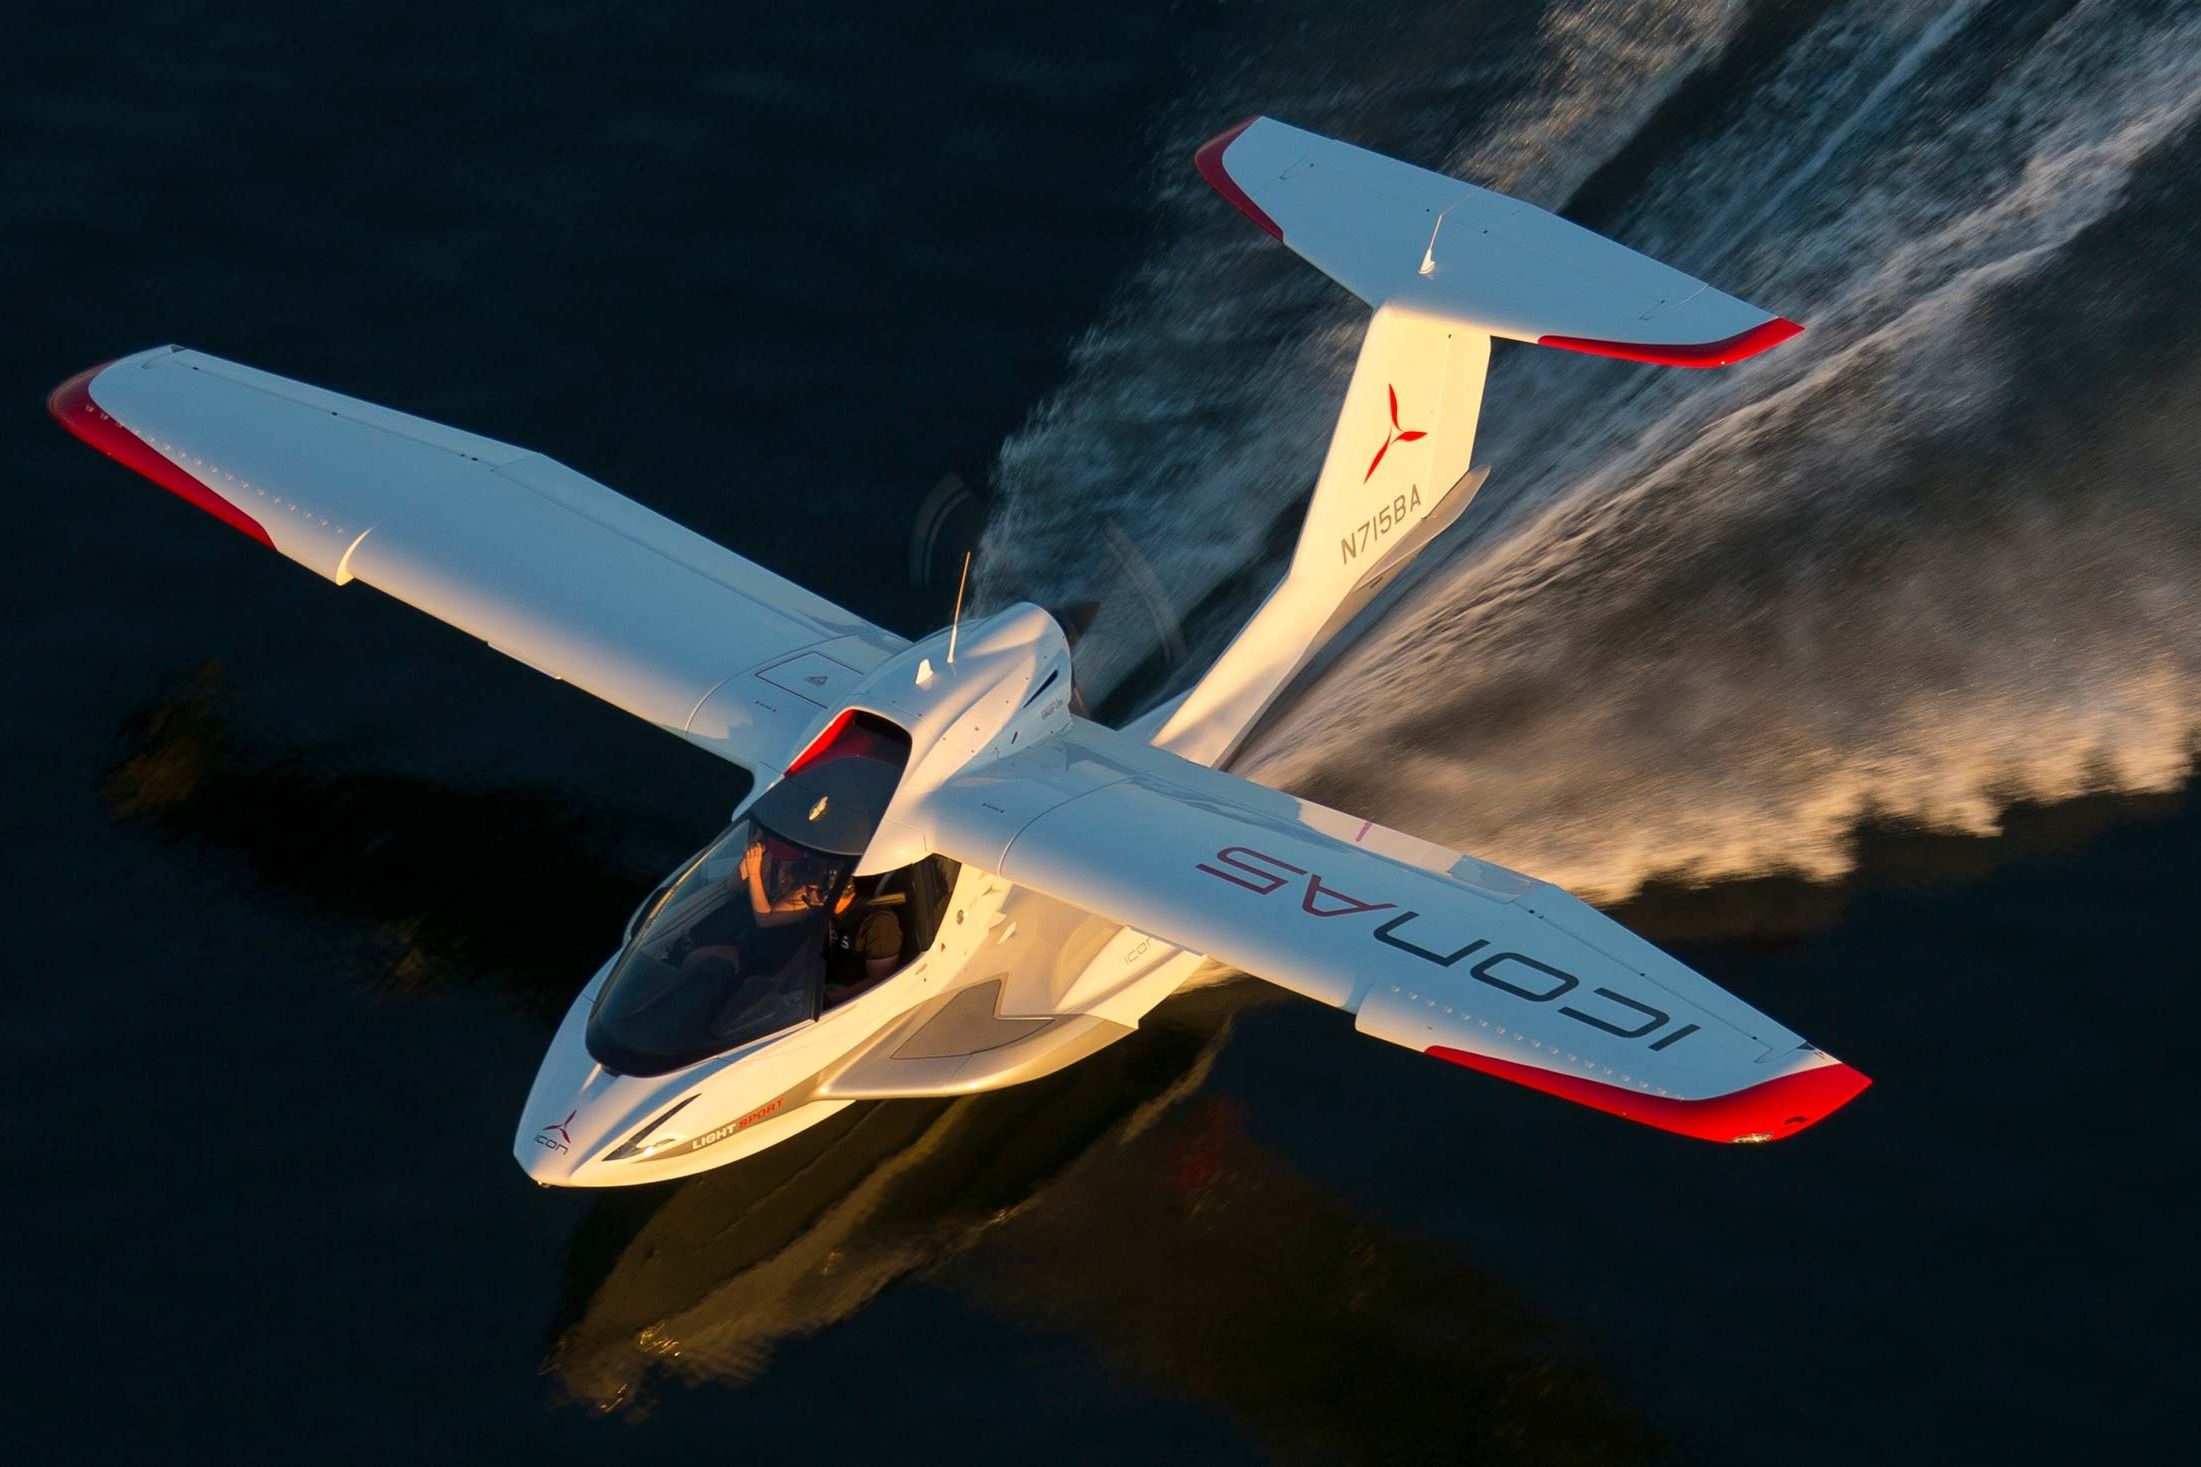 The ICON A5 landing on water